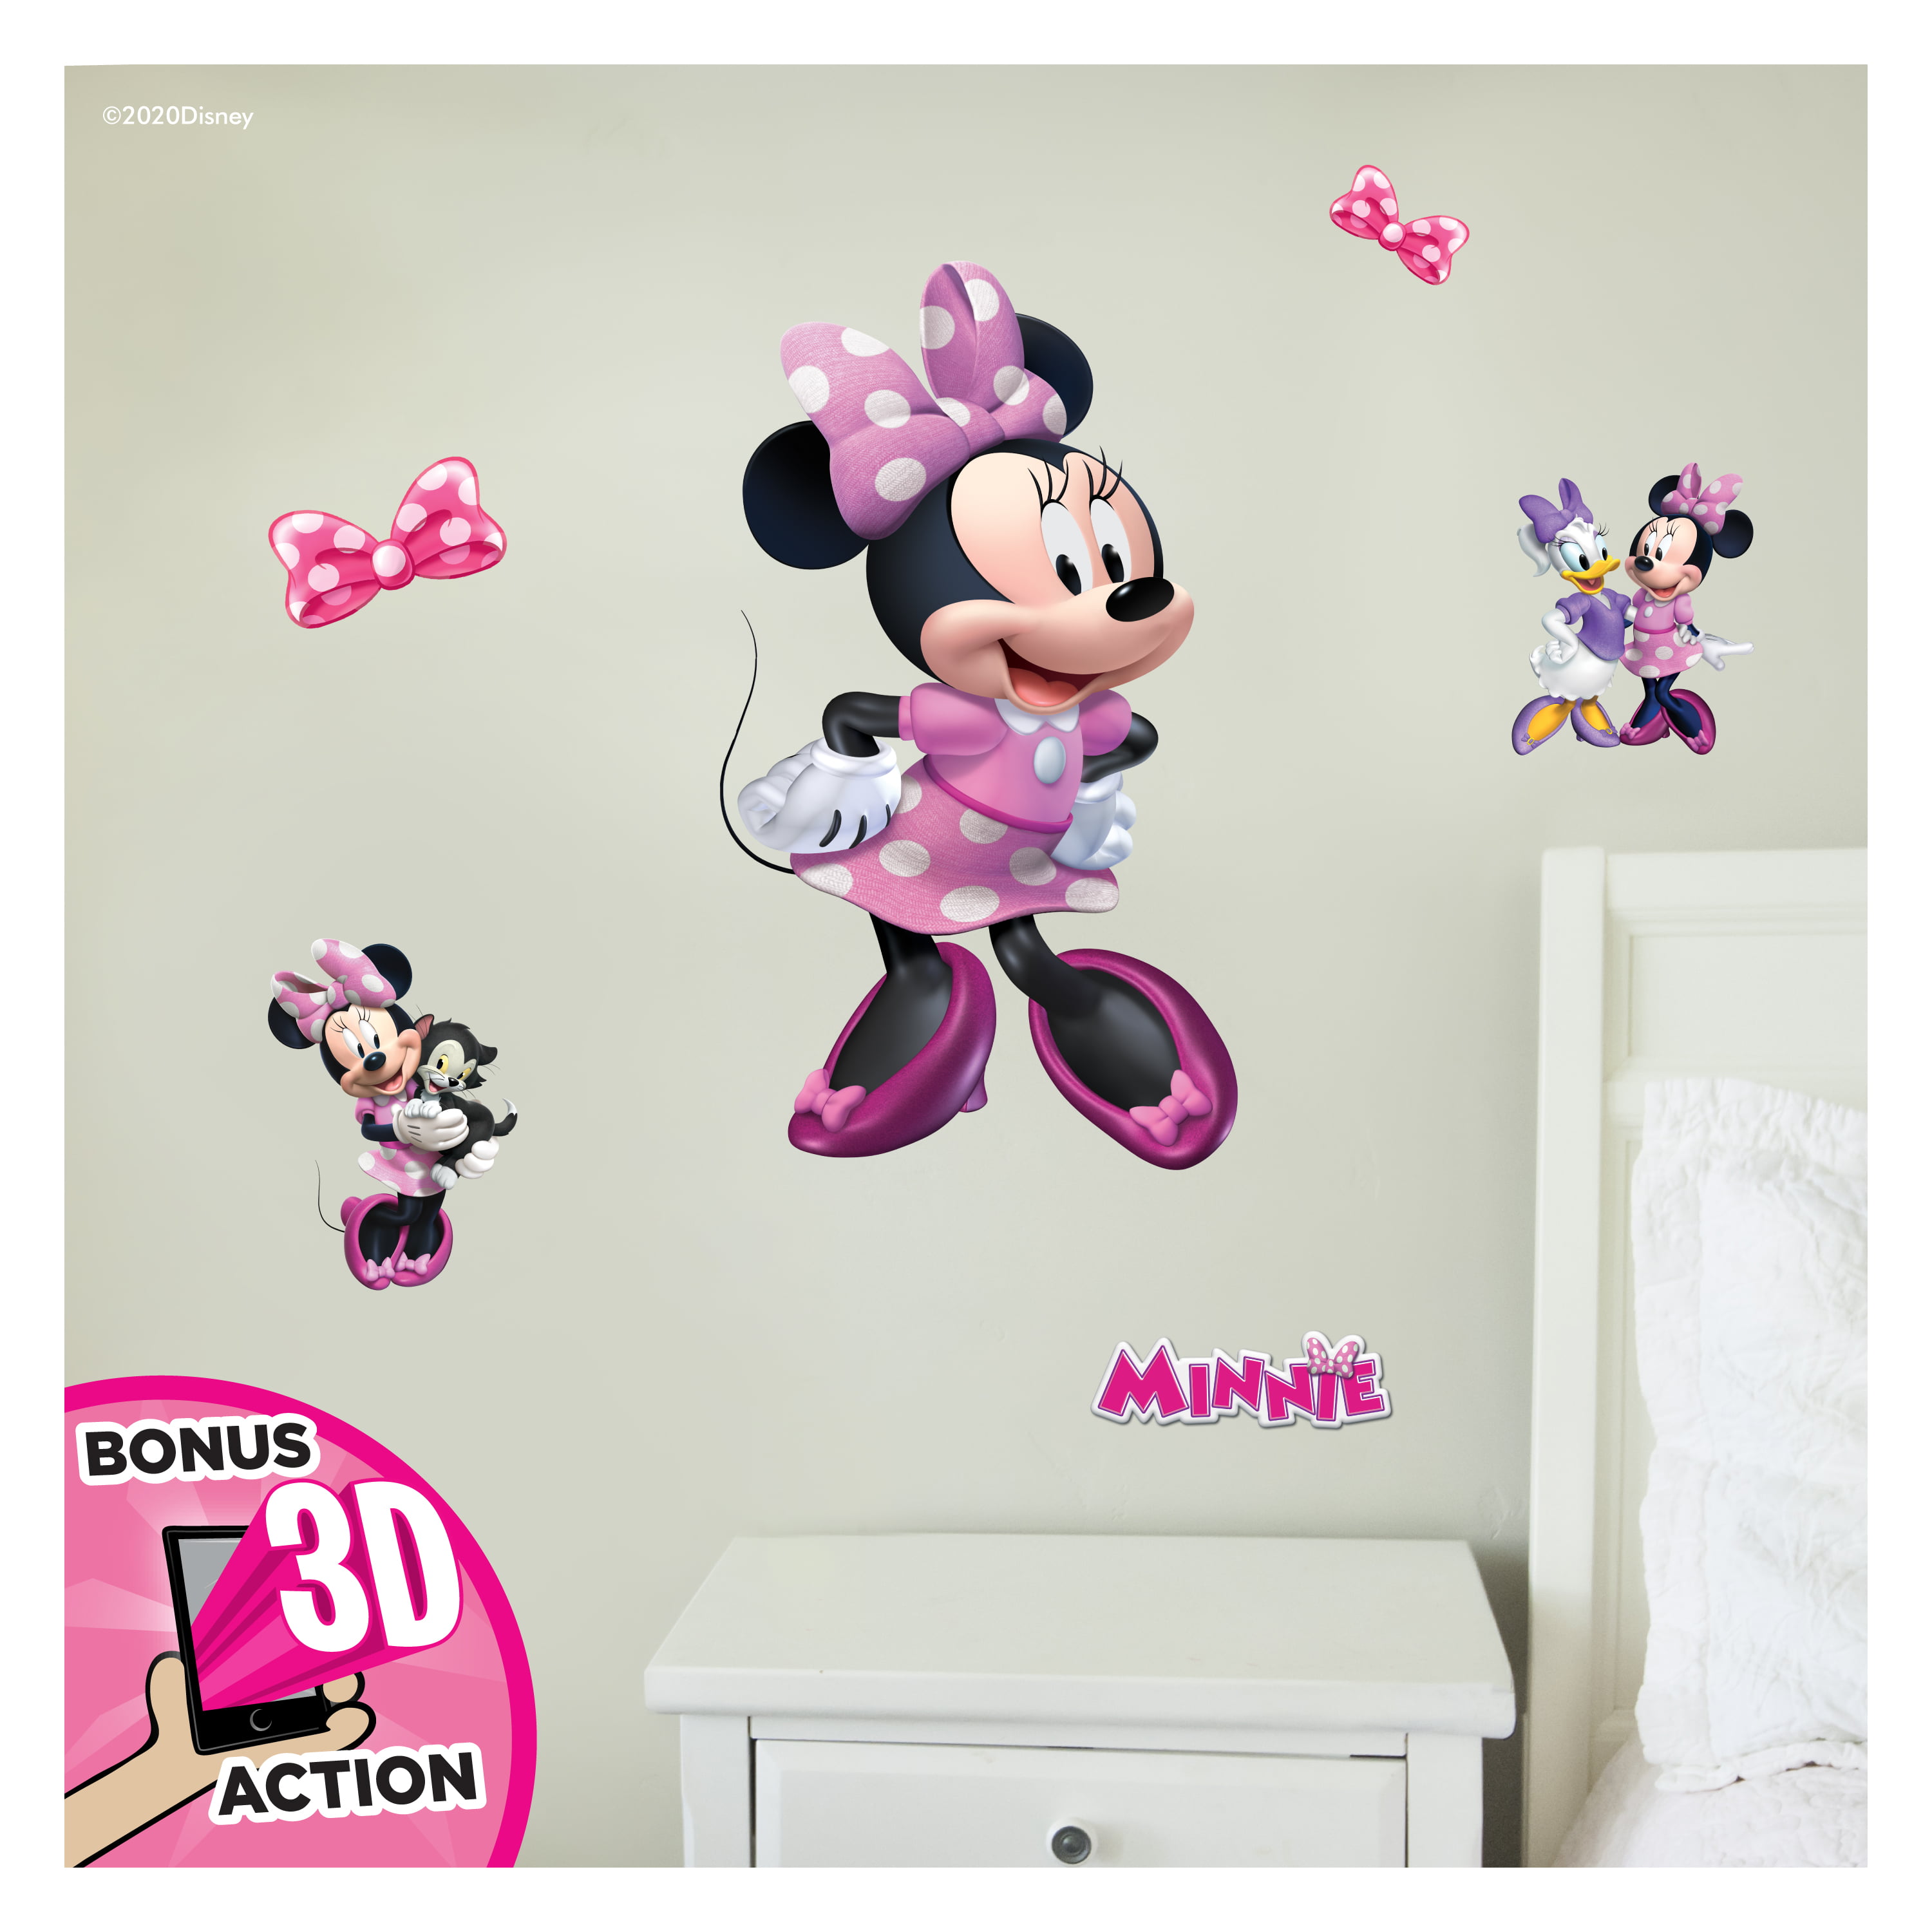 10 MICKEY MOUSE WALL STICKER WALL DECALS 3 SIZES PHOTOPAPER 